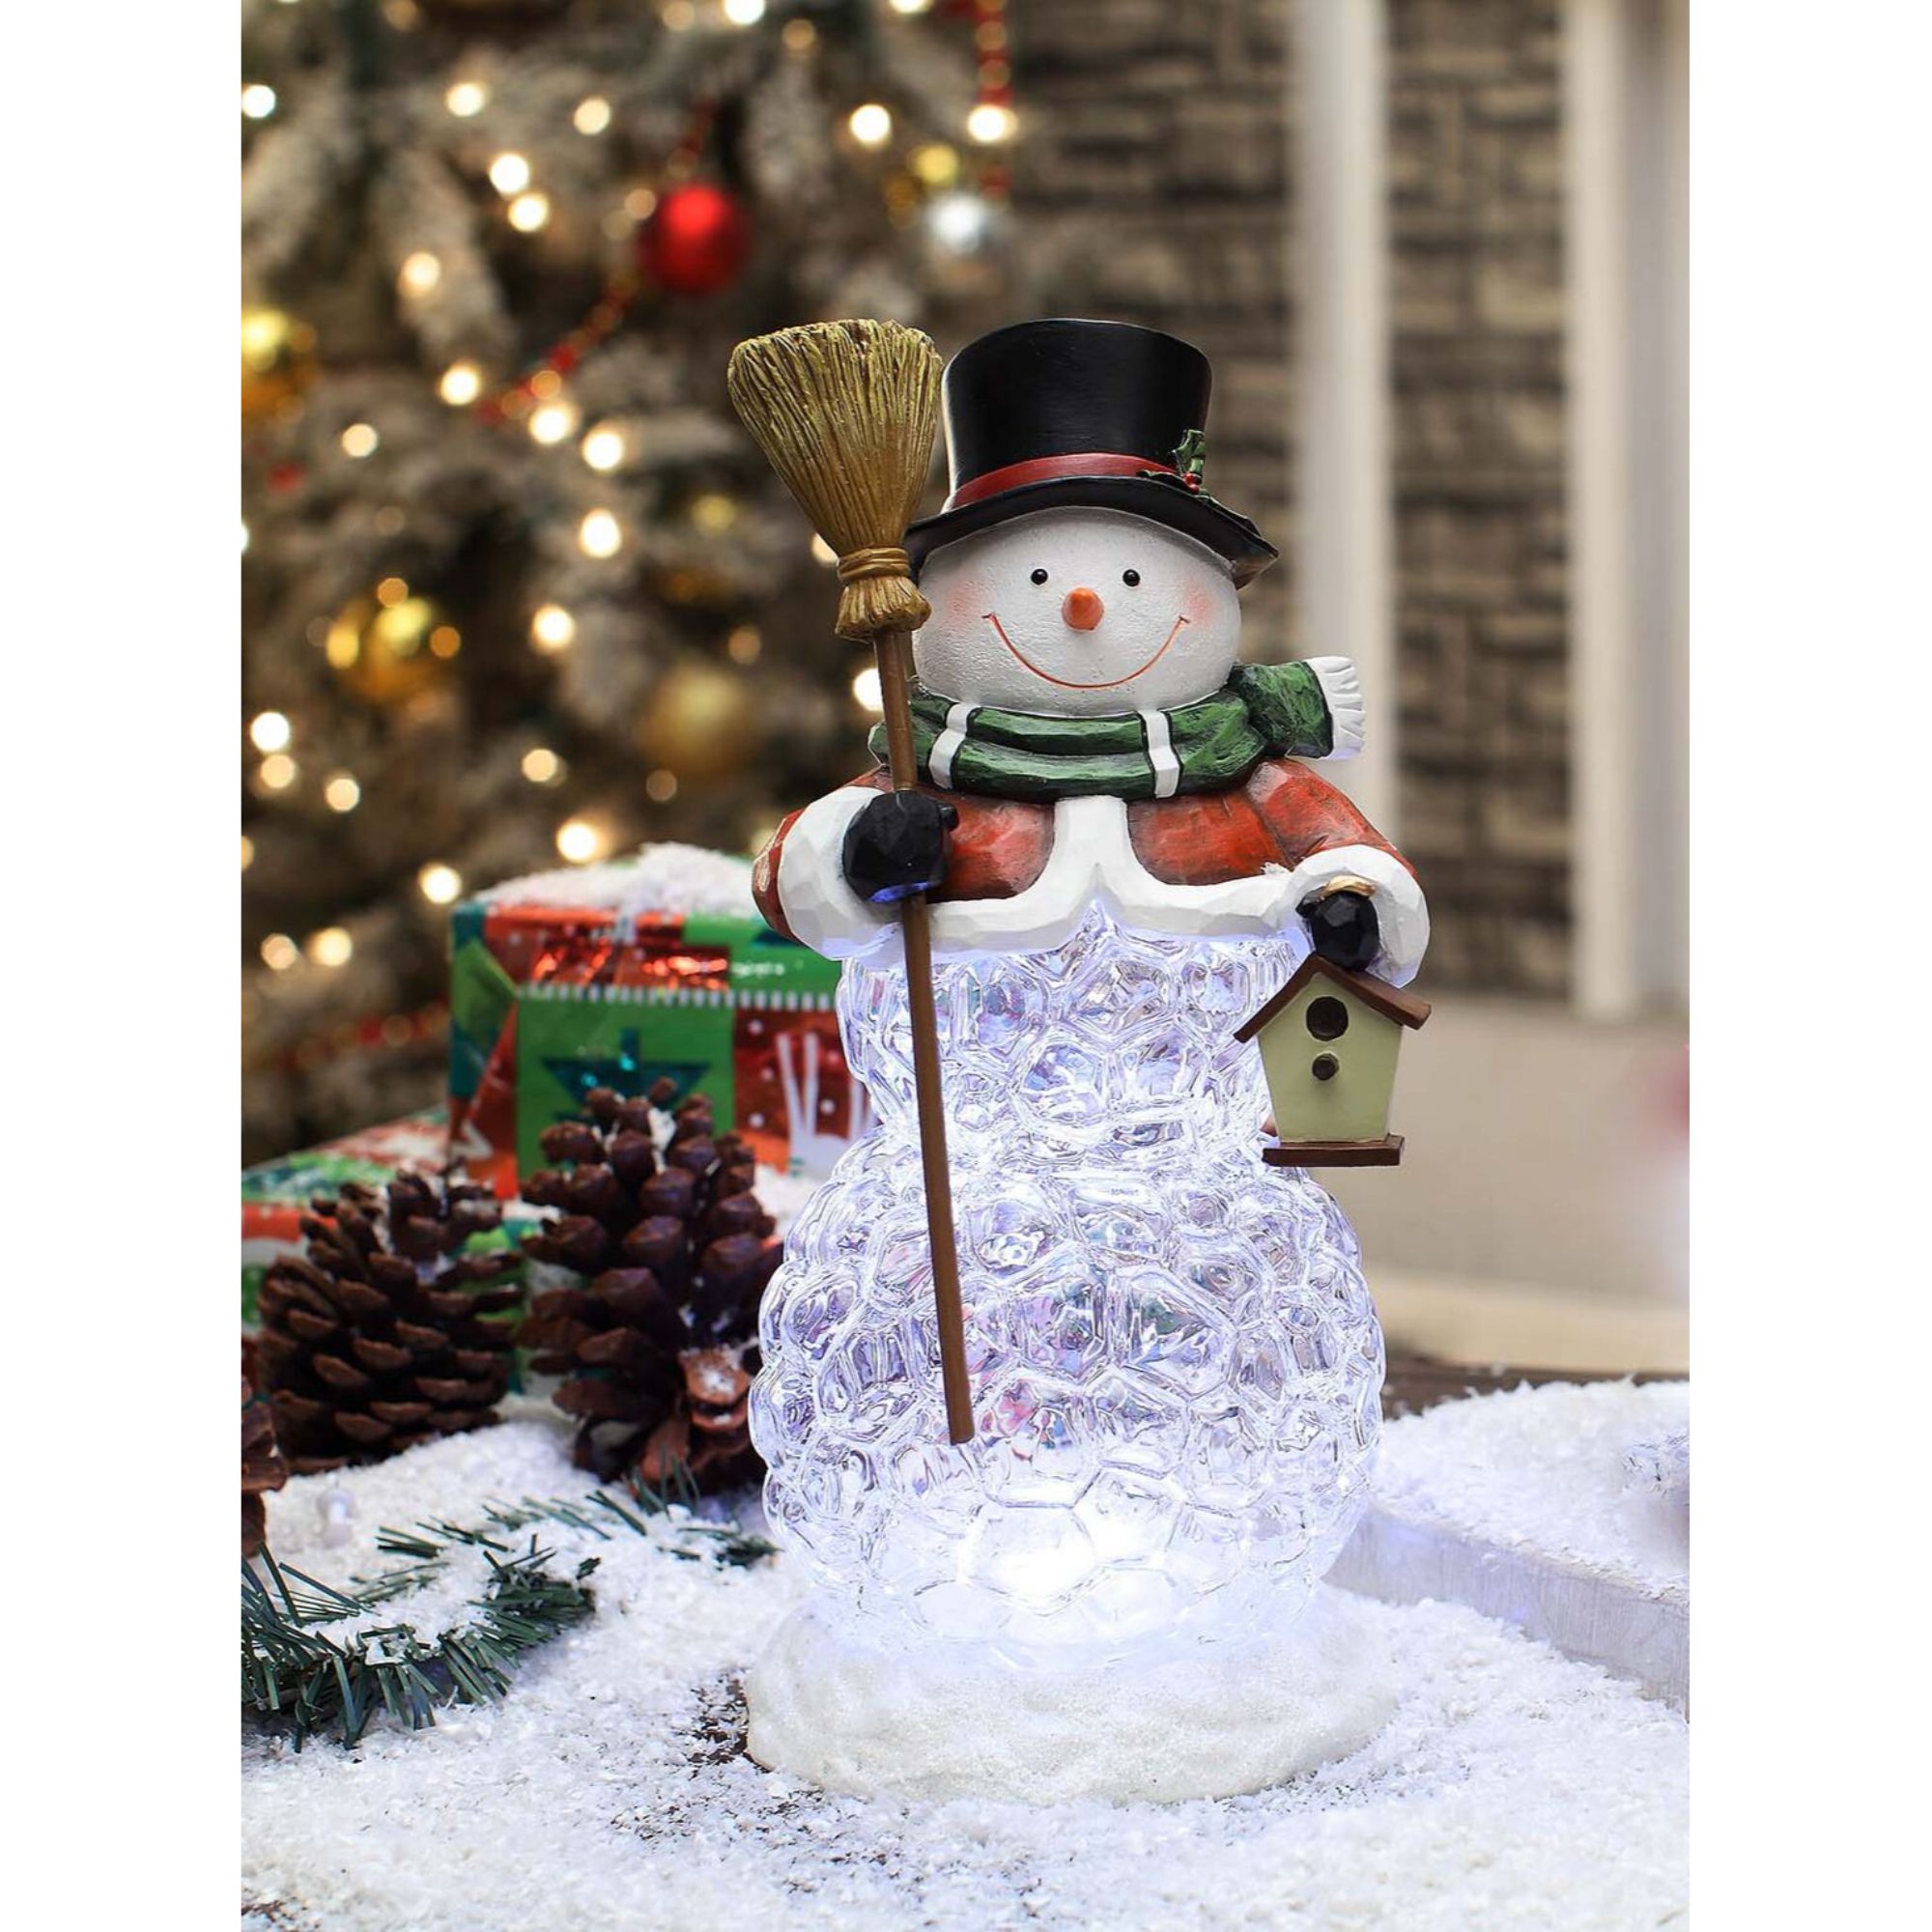 Icy Giftware 11.4" Black and Green Snowman Broom Decorative Christmas Ornament